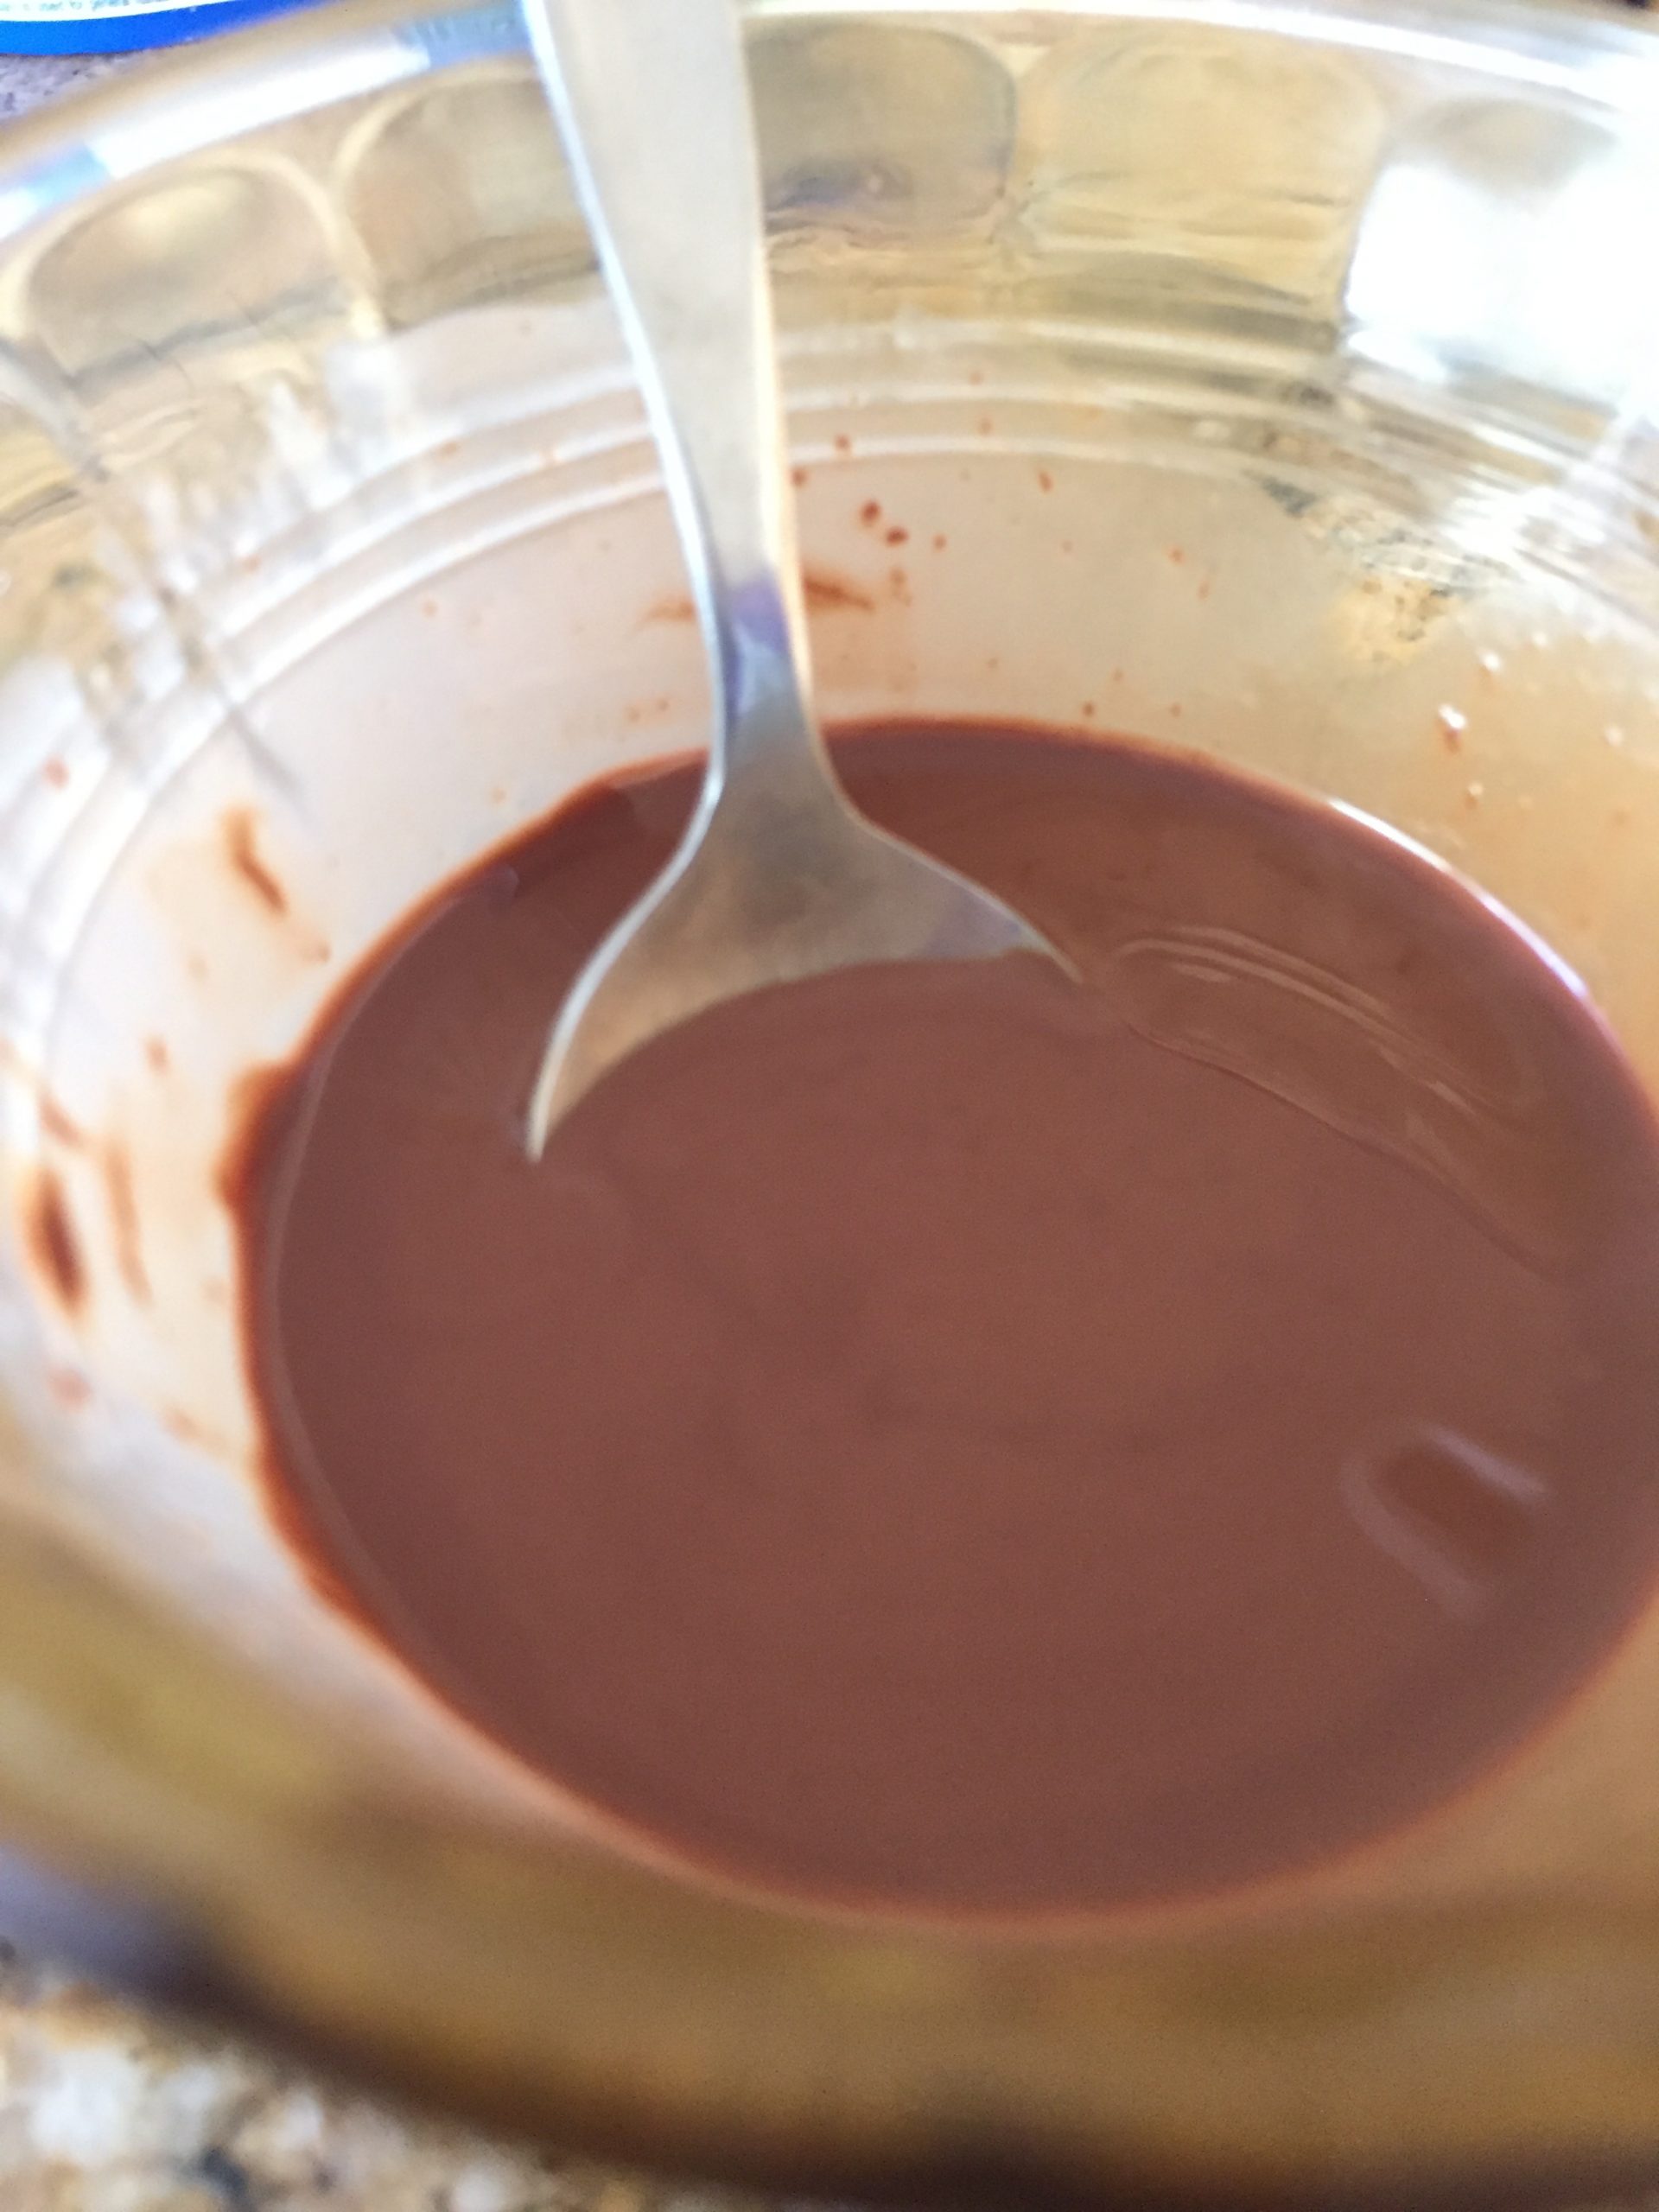 Melted chocolate with coconut oil for hard shell chocolate sauce